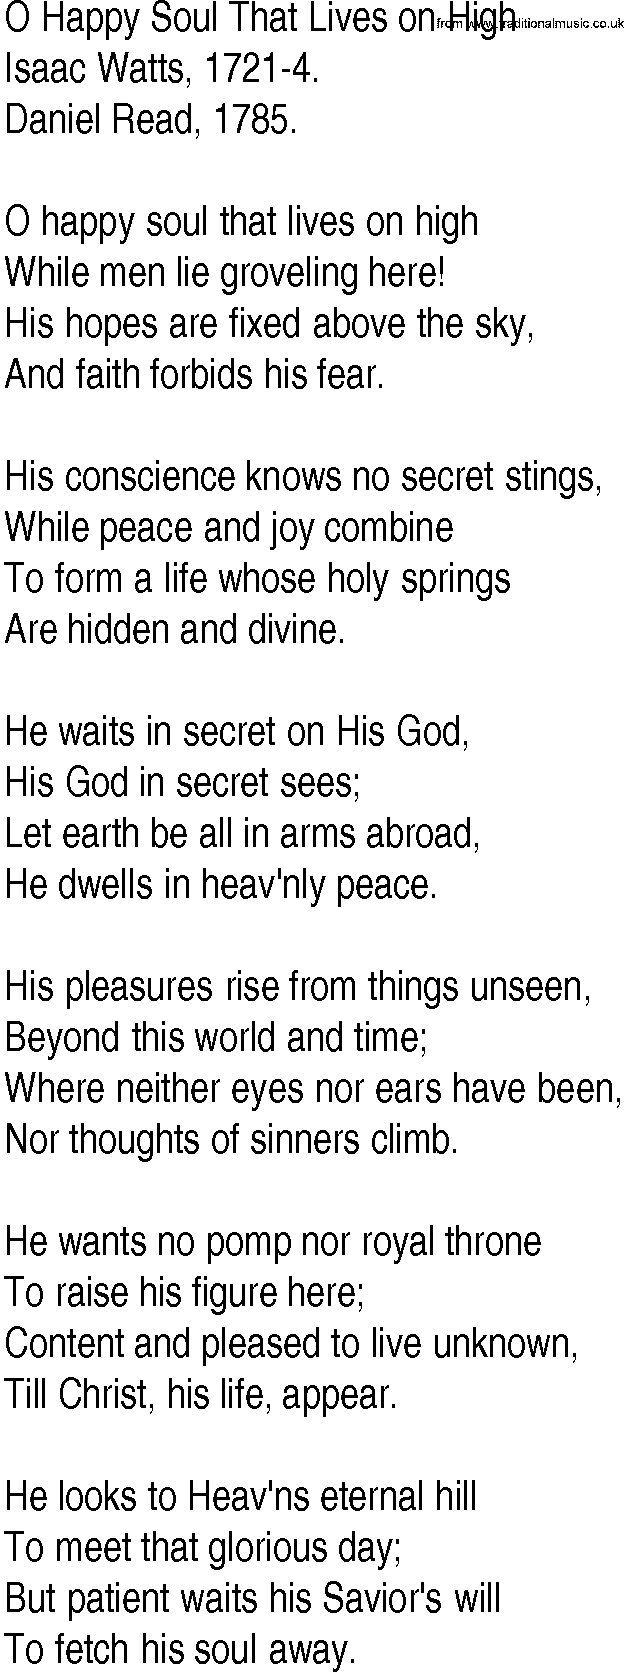 Hymn and Gospel Song: O Happy Soul That Lives on High by Isaac Watts lyrics